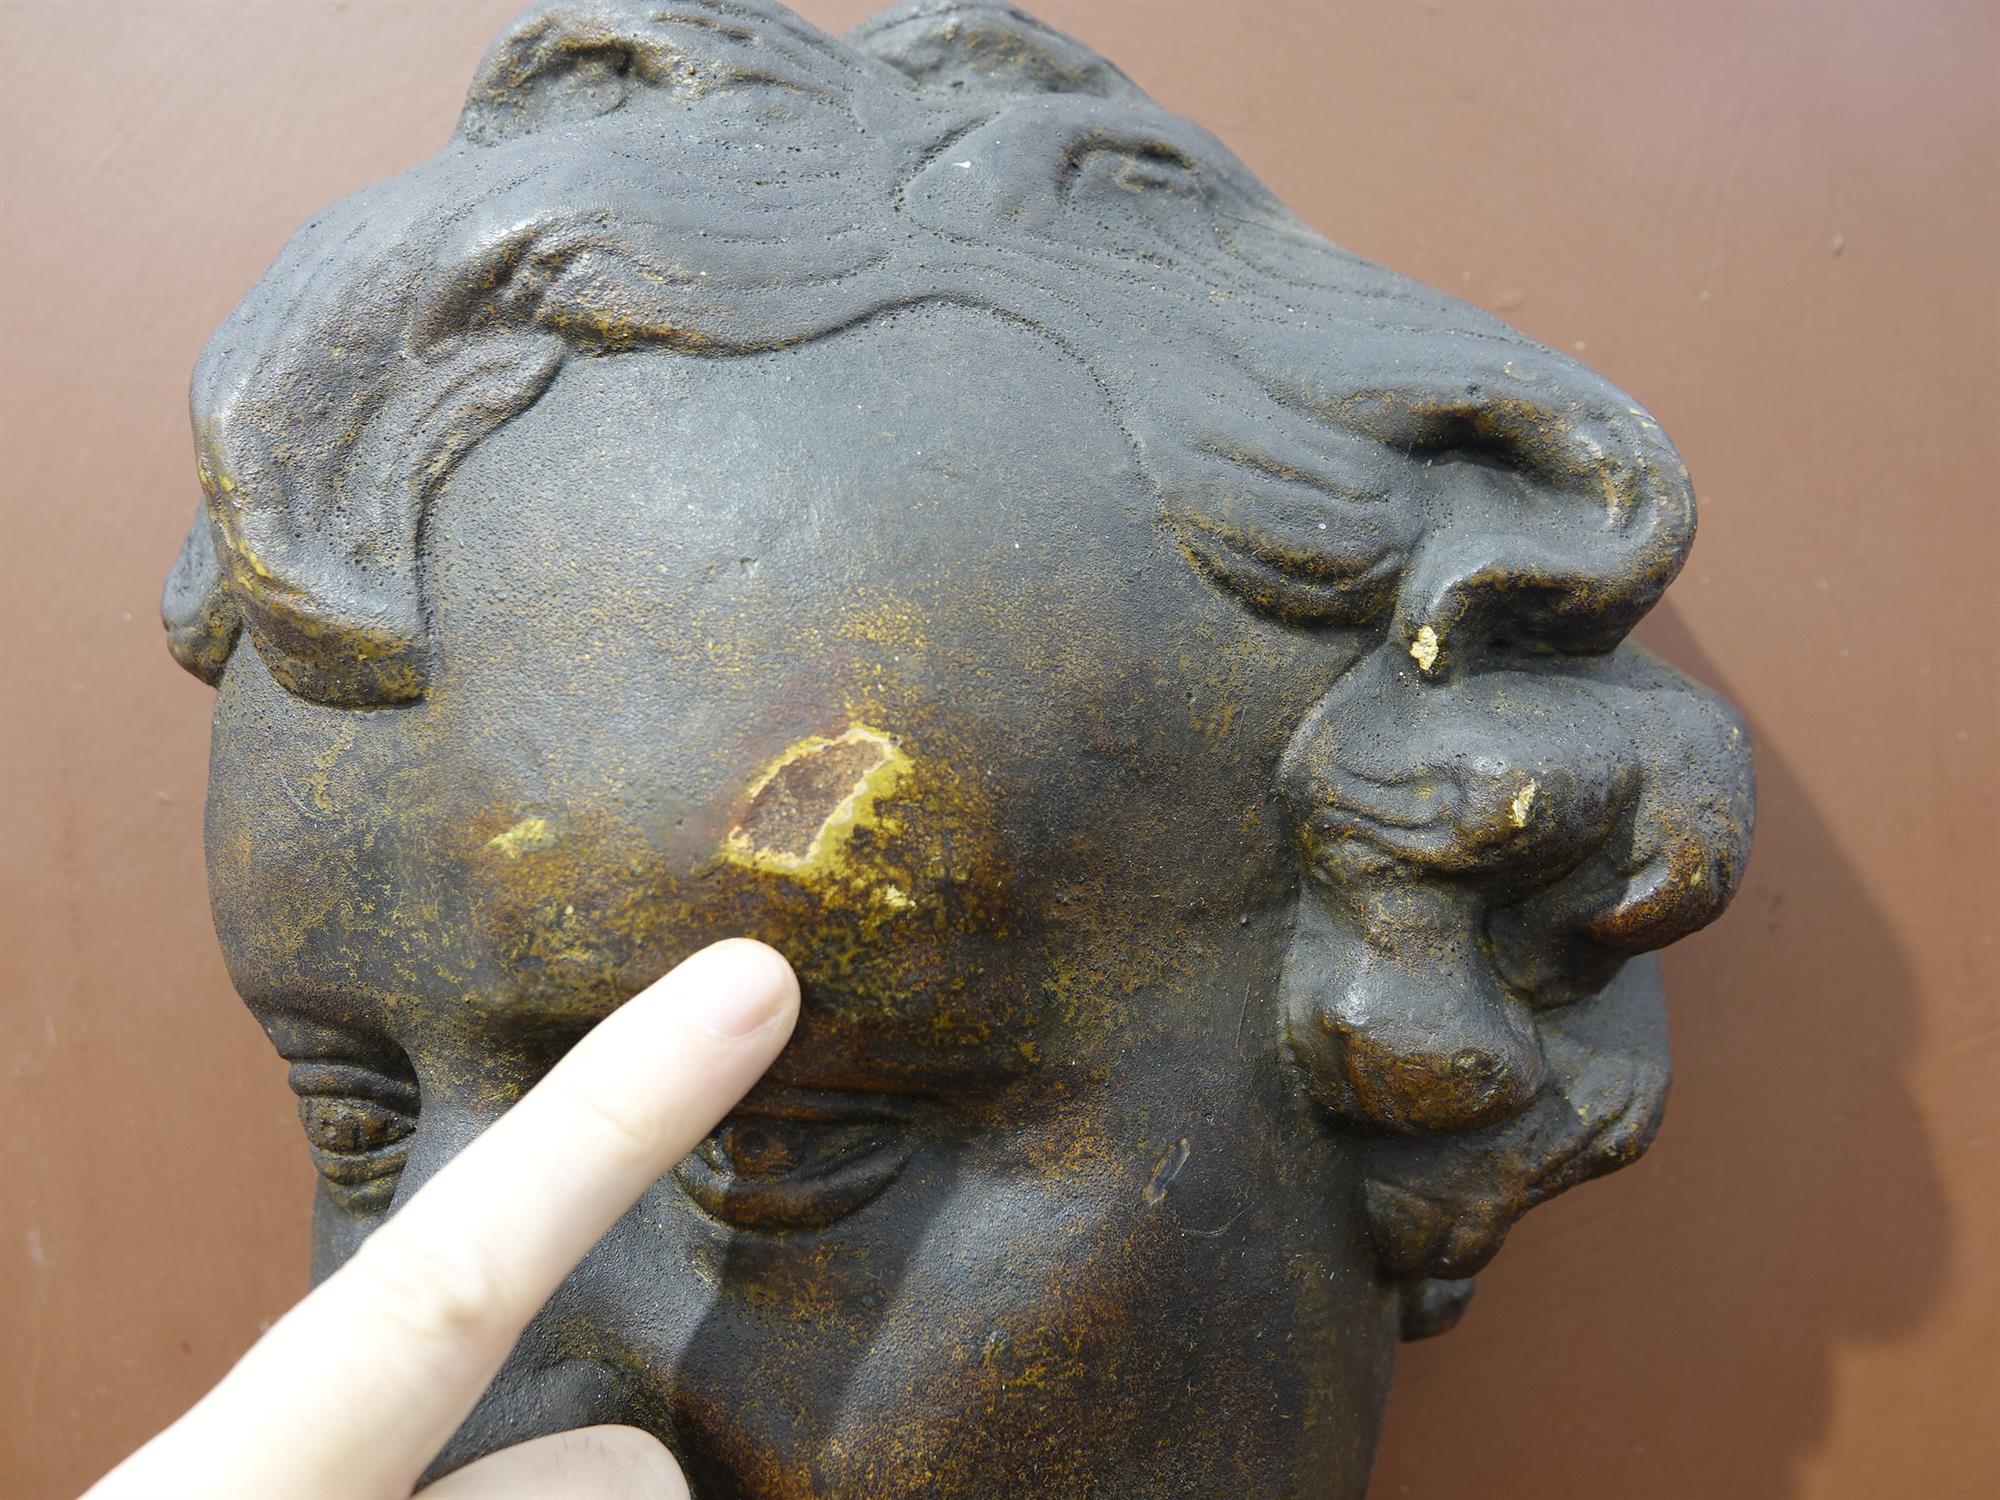 ***Please note: this is ceramic with a 'bronzed' finish rather than bronze*** A BRONZED DEATH MASK - Image 6 of 12